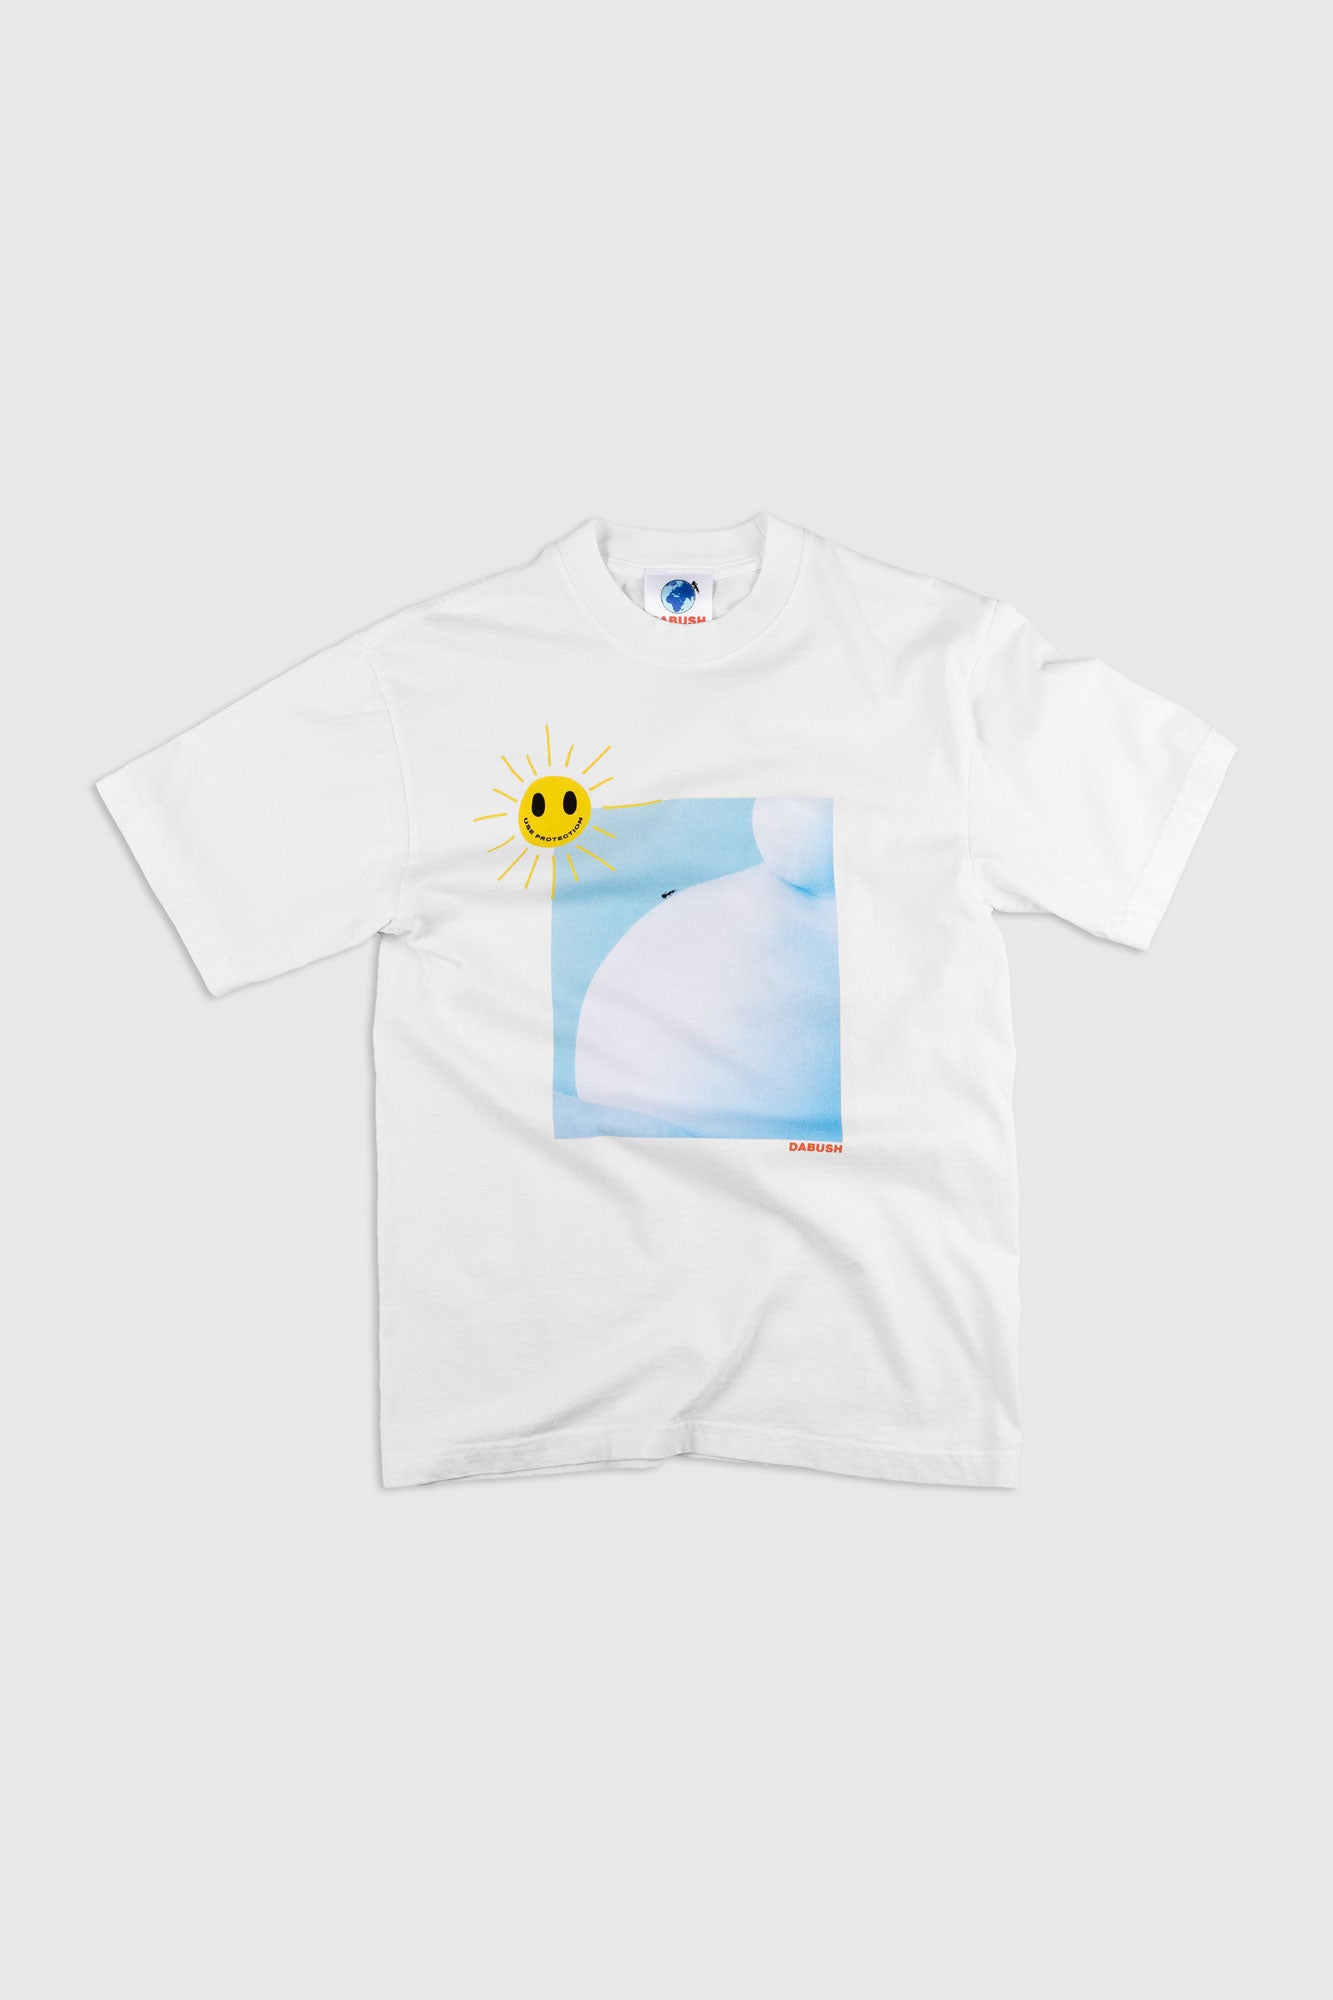 DABUSH PROTECTION T-SHIRT. 100% Cotton, oversized tee with  Back and front print. Made in Tel aviv. Shop and view the latest Drops from the official DABUSH website. Worldwide Shipping. DABUSH is a publishing house, design studio and a brand based in Tel Aviv, Israel.